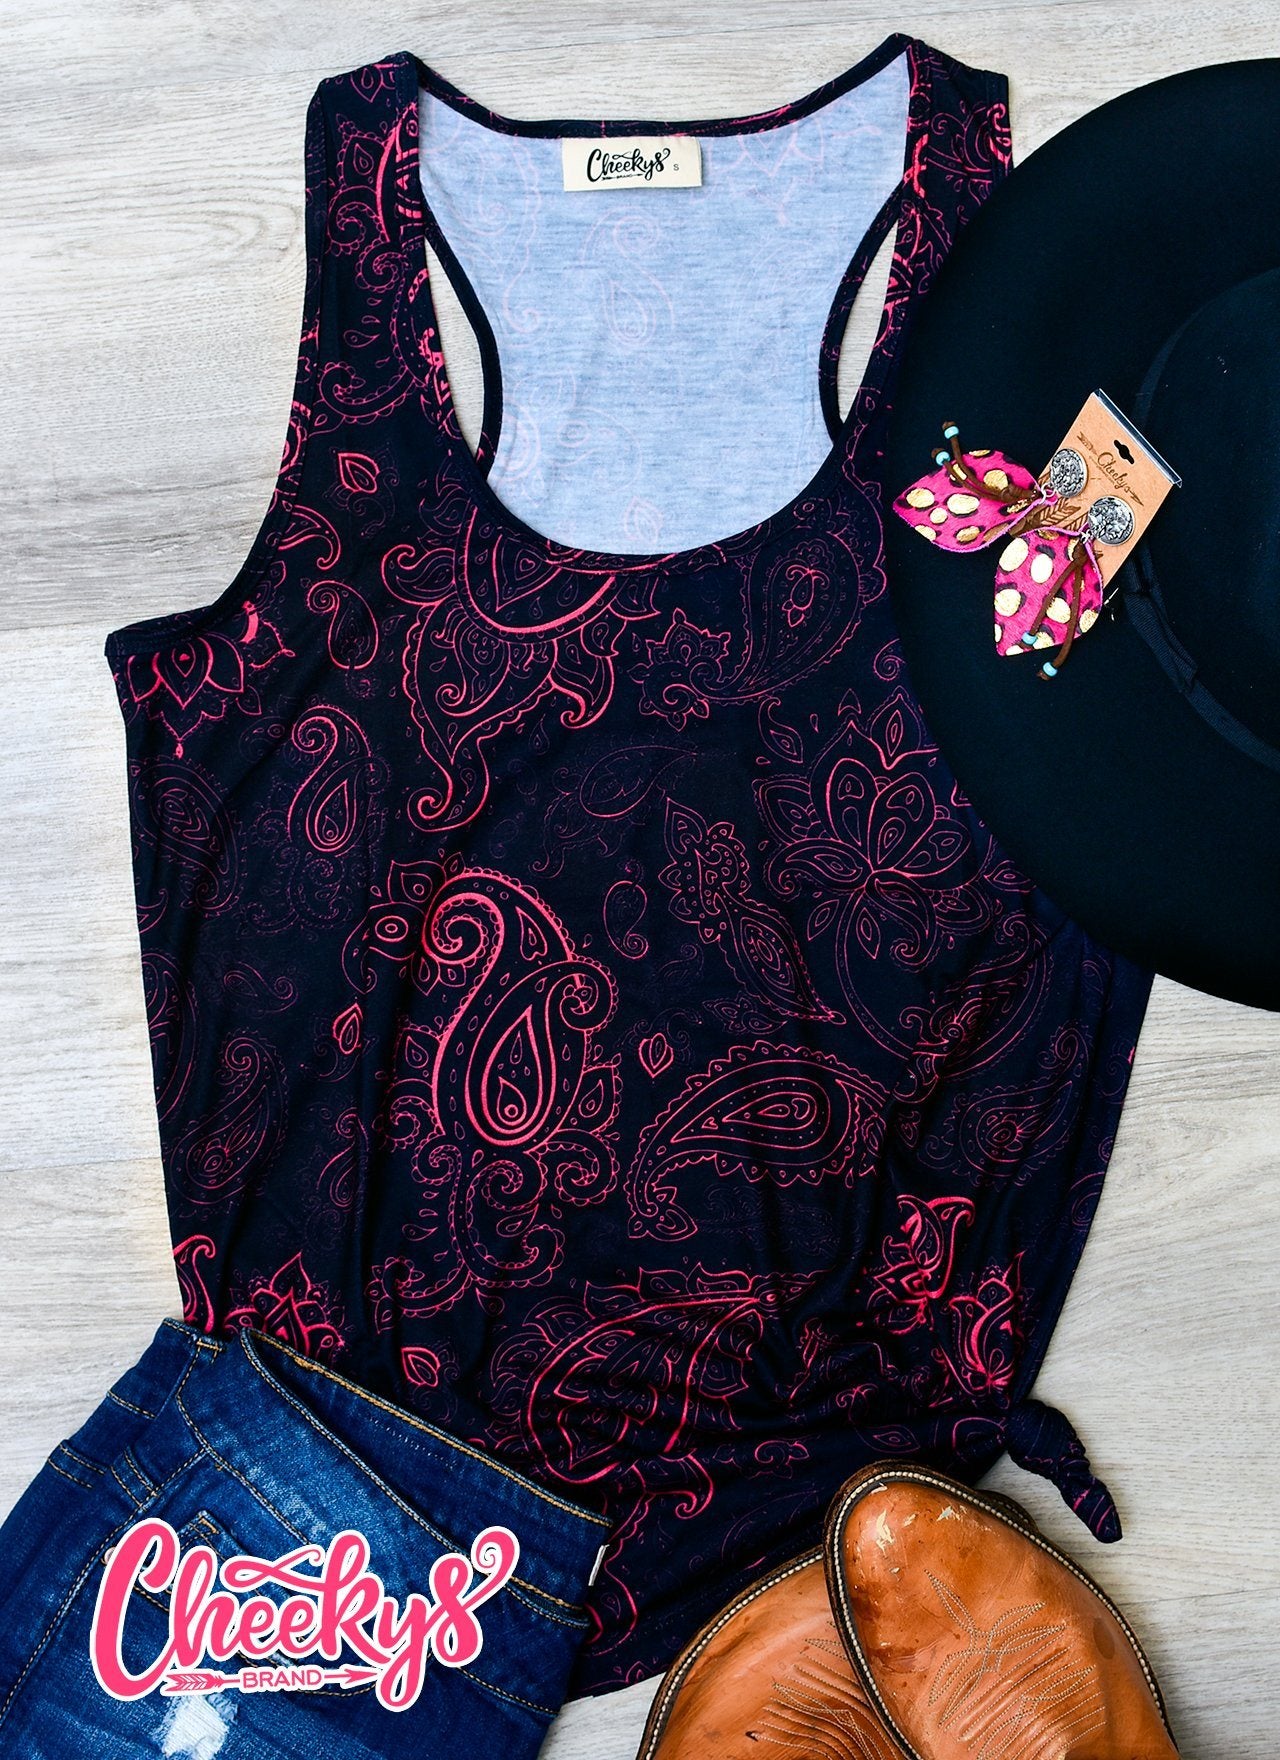 The Madelyn Paisley Tank In Black And Pink Cheekys Apparel 23 